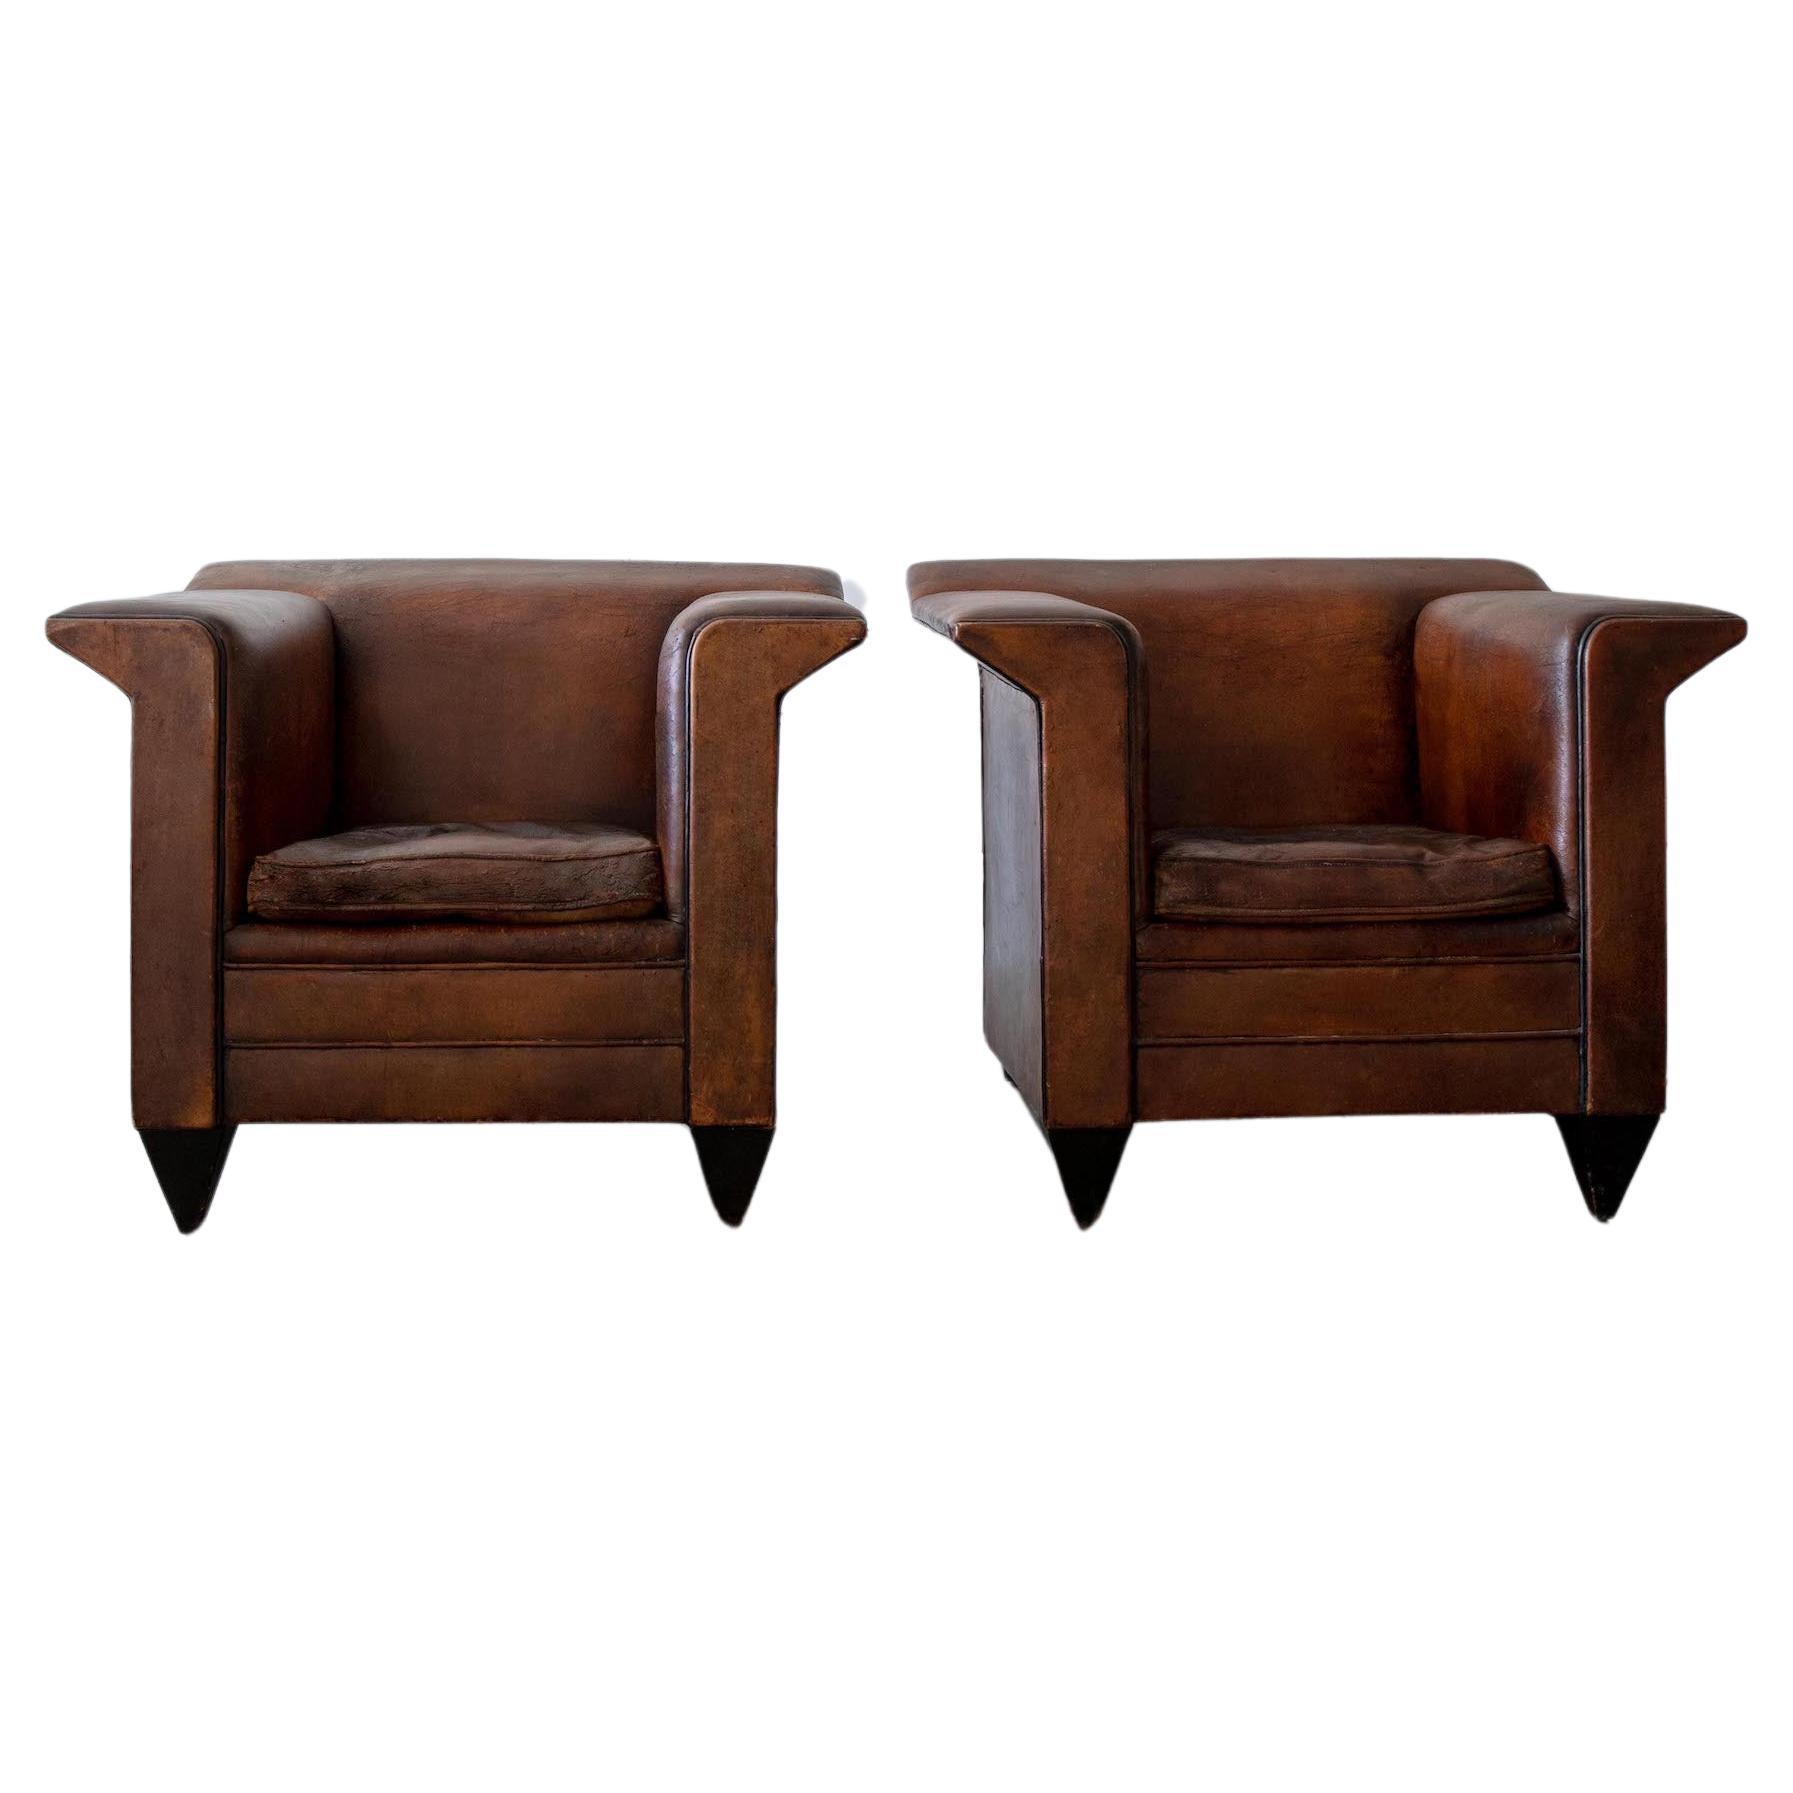 Bart Van Bekhoven Sheepskin Leather Chairs For Sale